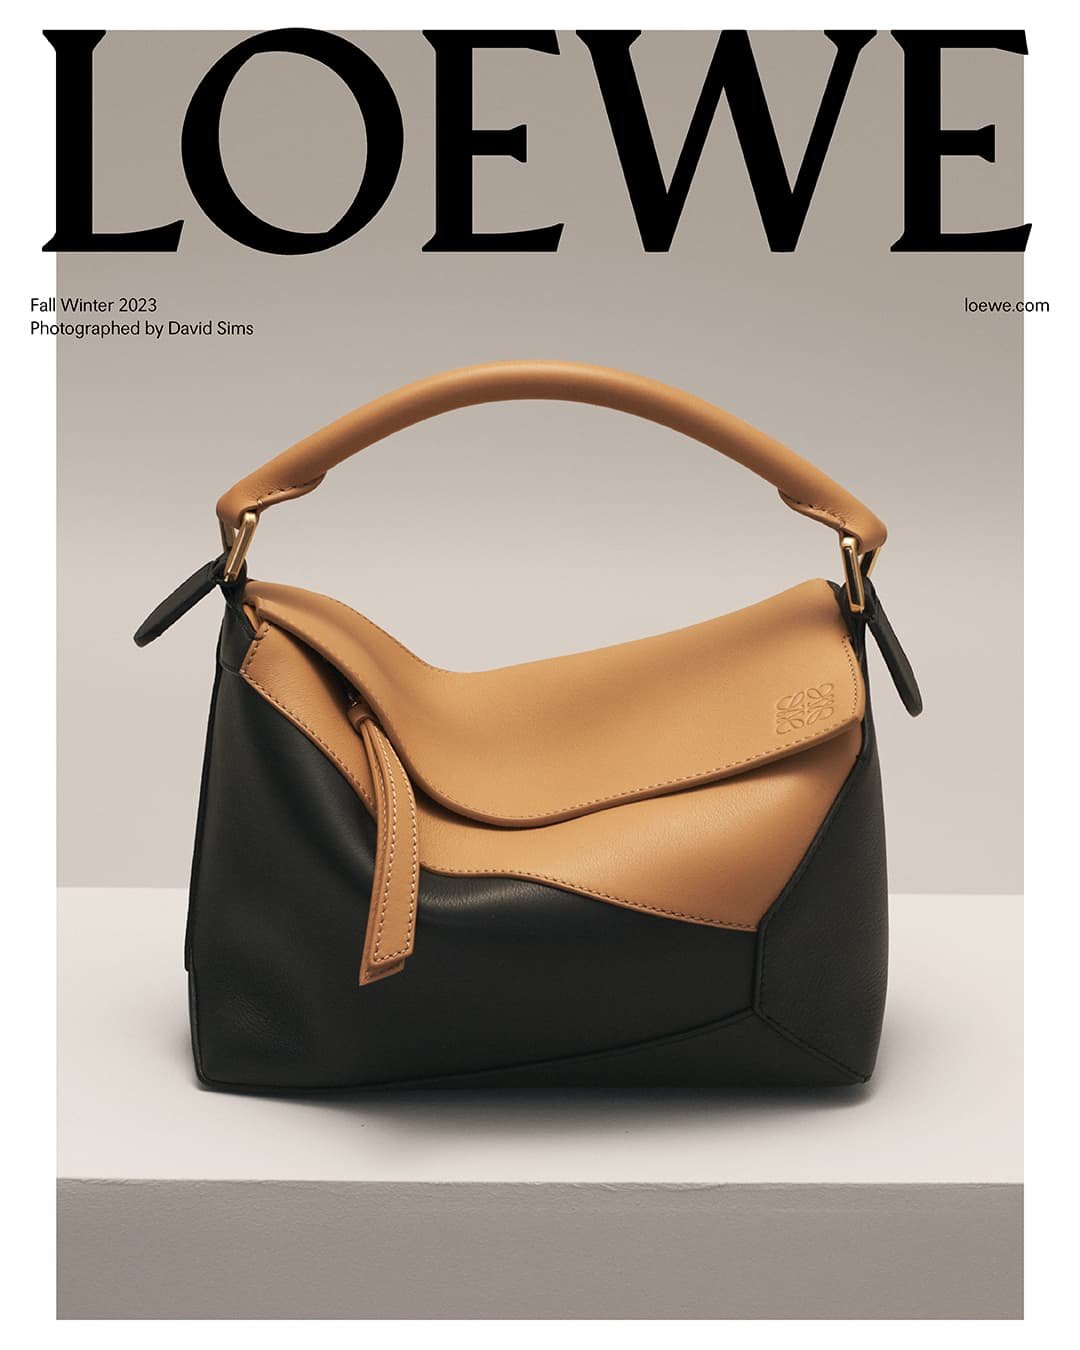 LOEWE S/S 2023 Men's Campaign Lensed by David Sims — Anne of Carversville